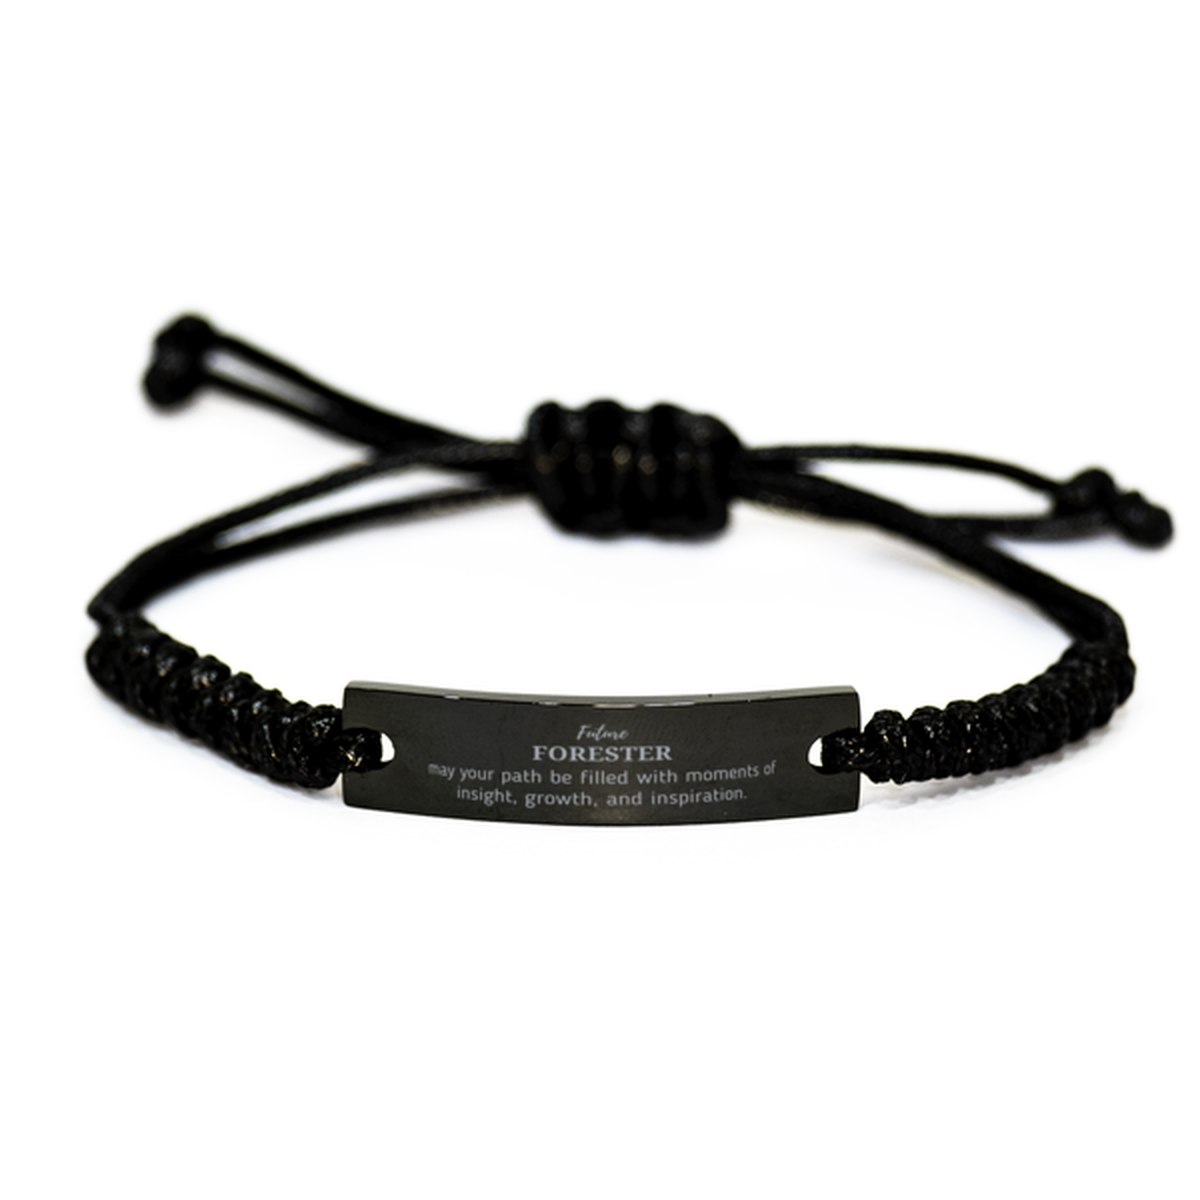 Future Forester Gifts, May your path be filled with moments of insight, Graduation Gifts for New Forester, Christmas Unique Black Rope Bracelet For Men, Women, Friends